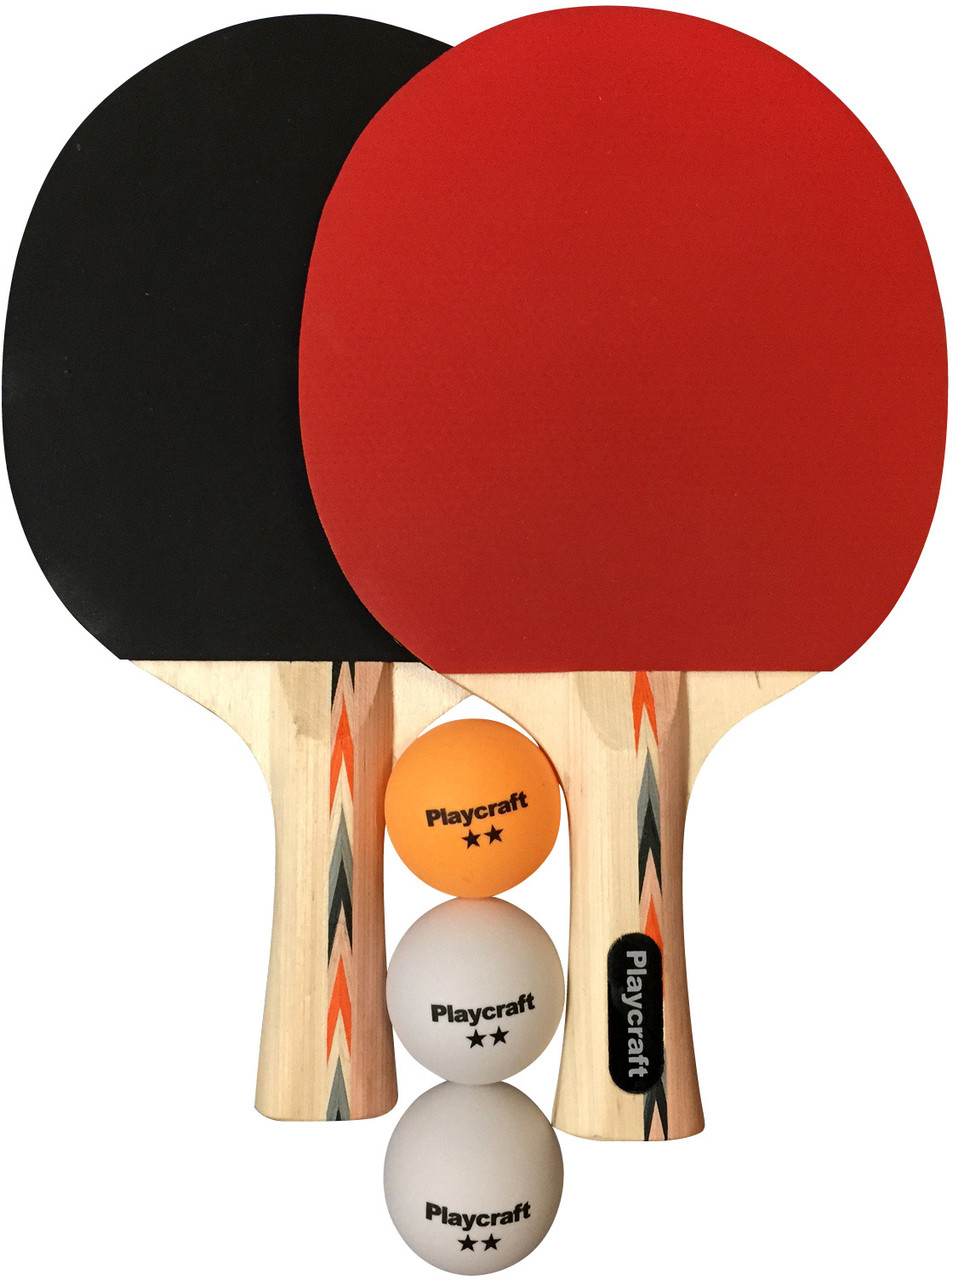 Premium Vector  Ping pong or table tennis equipment set for playing sport  game